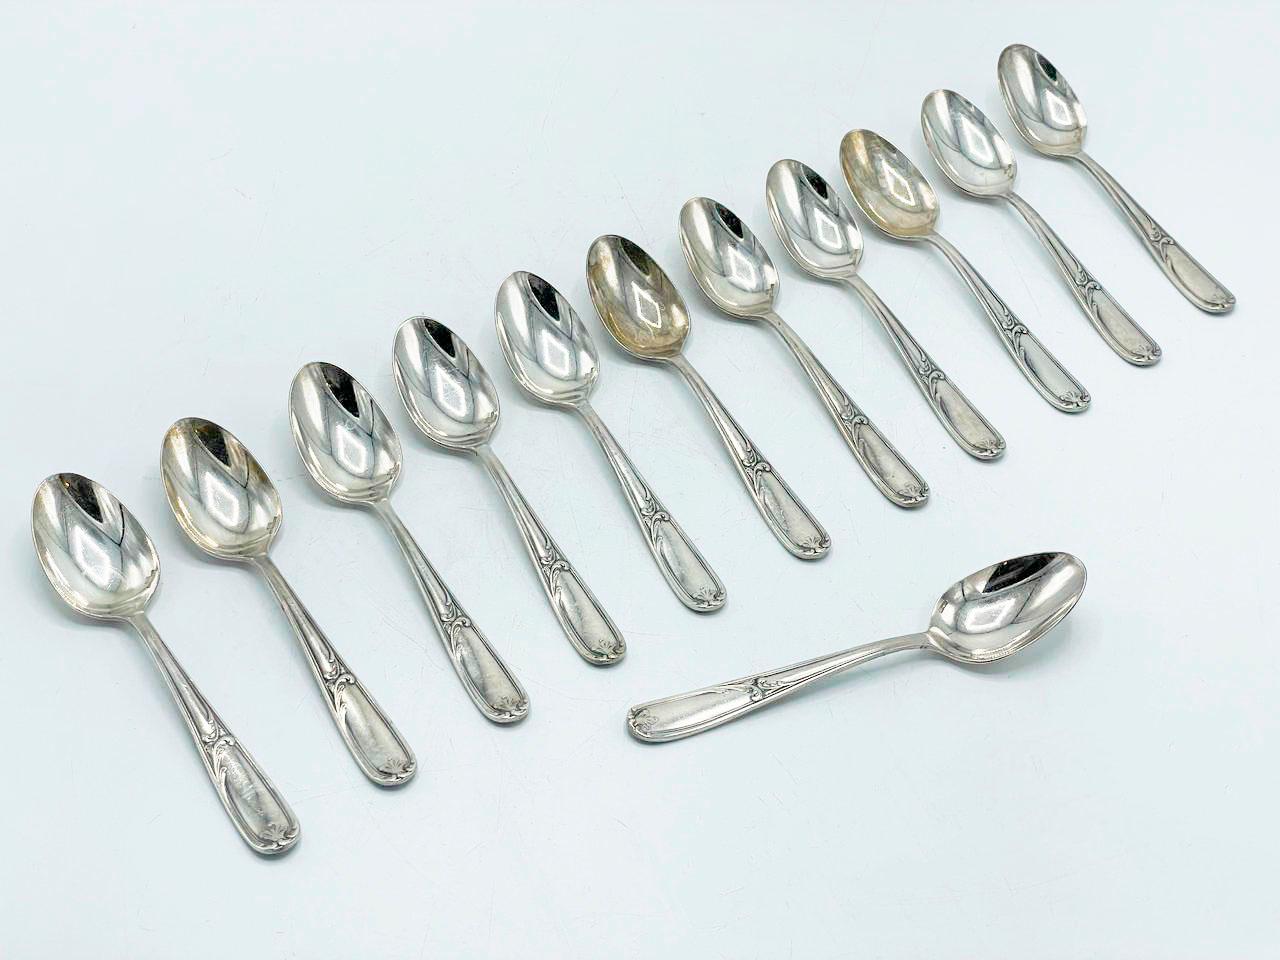 Christofle Made in Argentina, Flatware art nouveau in Silverplated For Sale 9